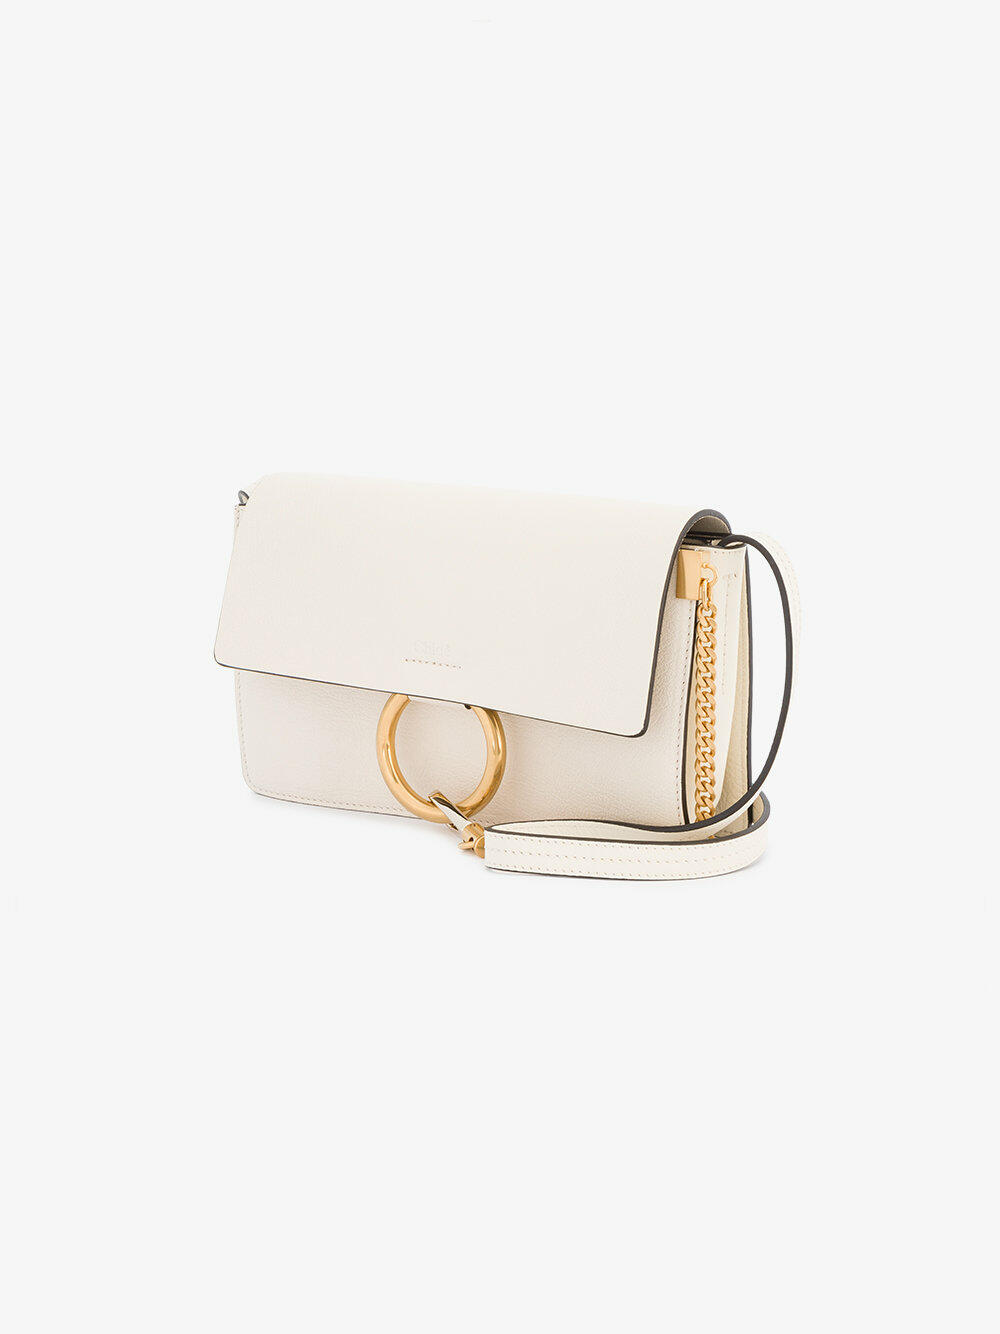 Chloé - Faye Off-White Grained Leather Small Shoulder Bag